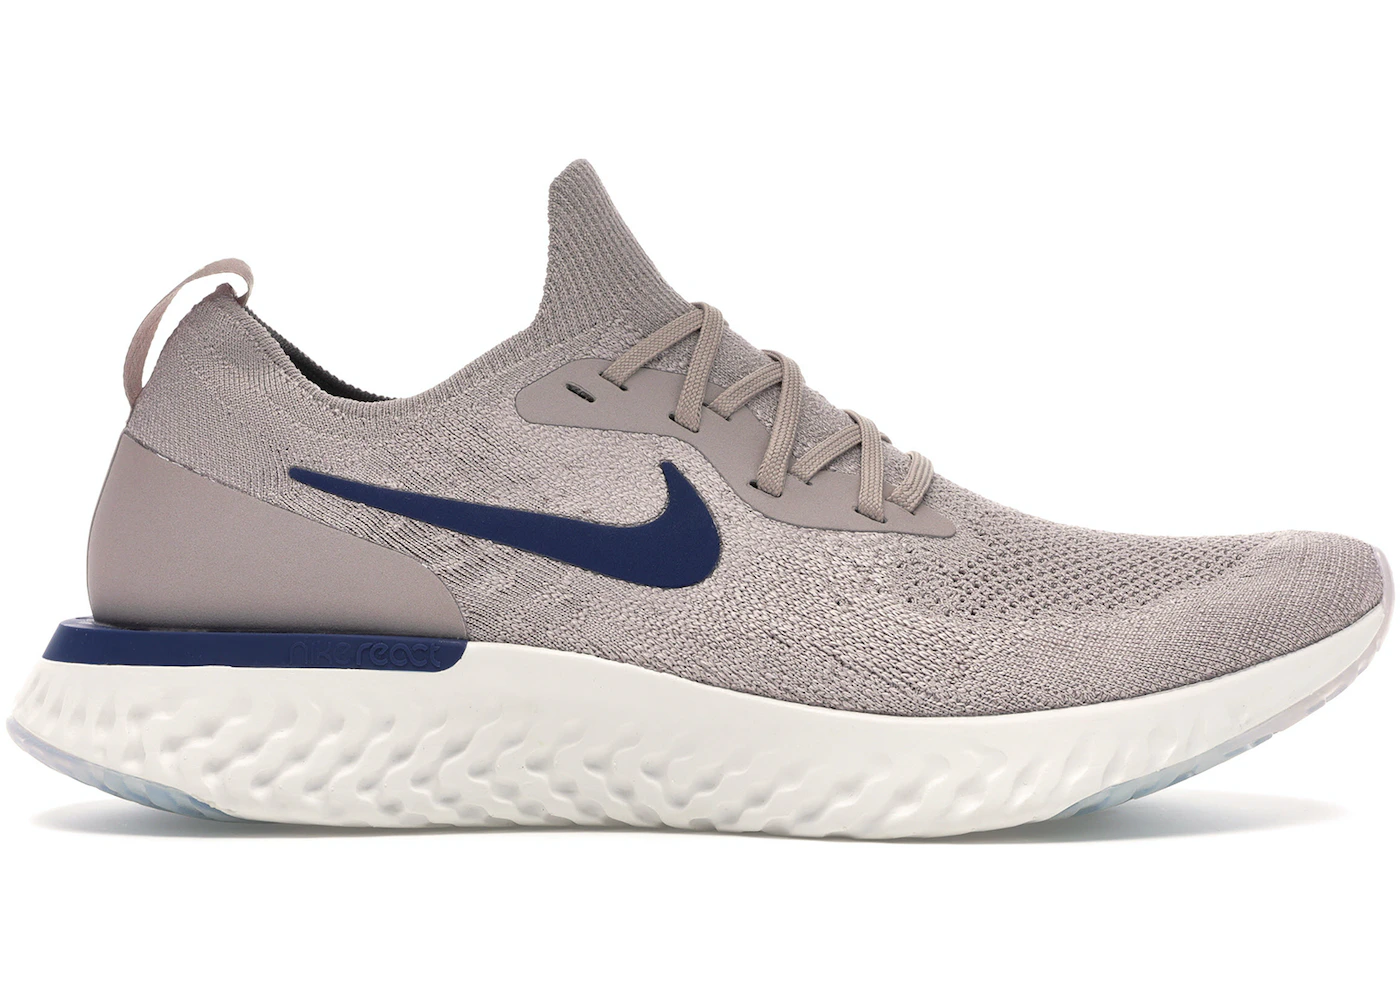 Nike Epic React Flyknit Diffused Taupe Men's - AQ0067-201 - US